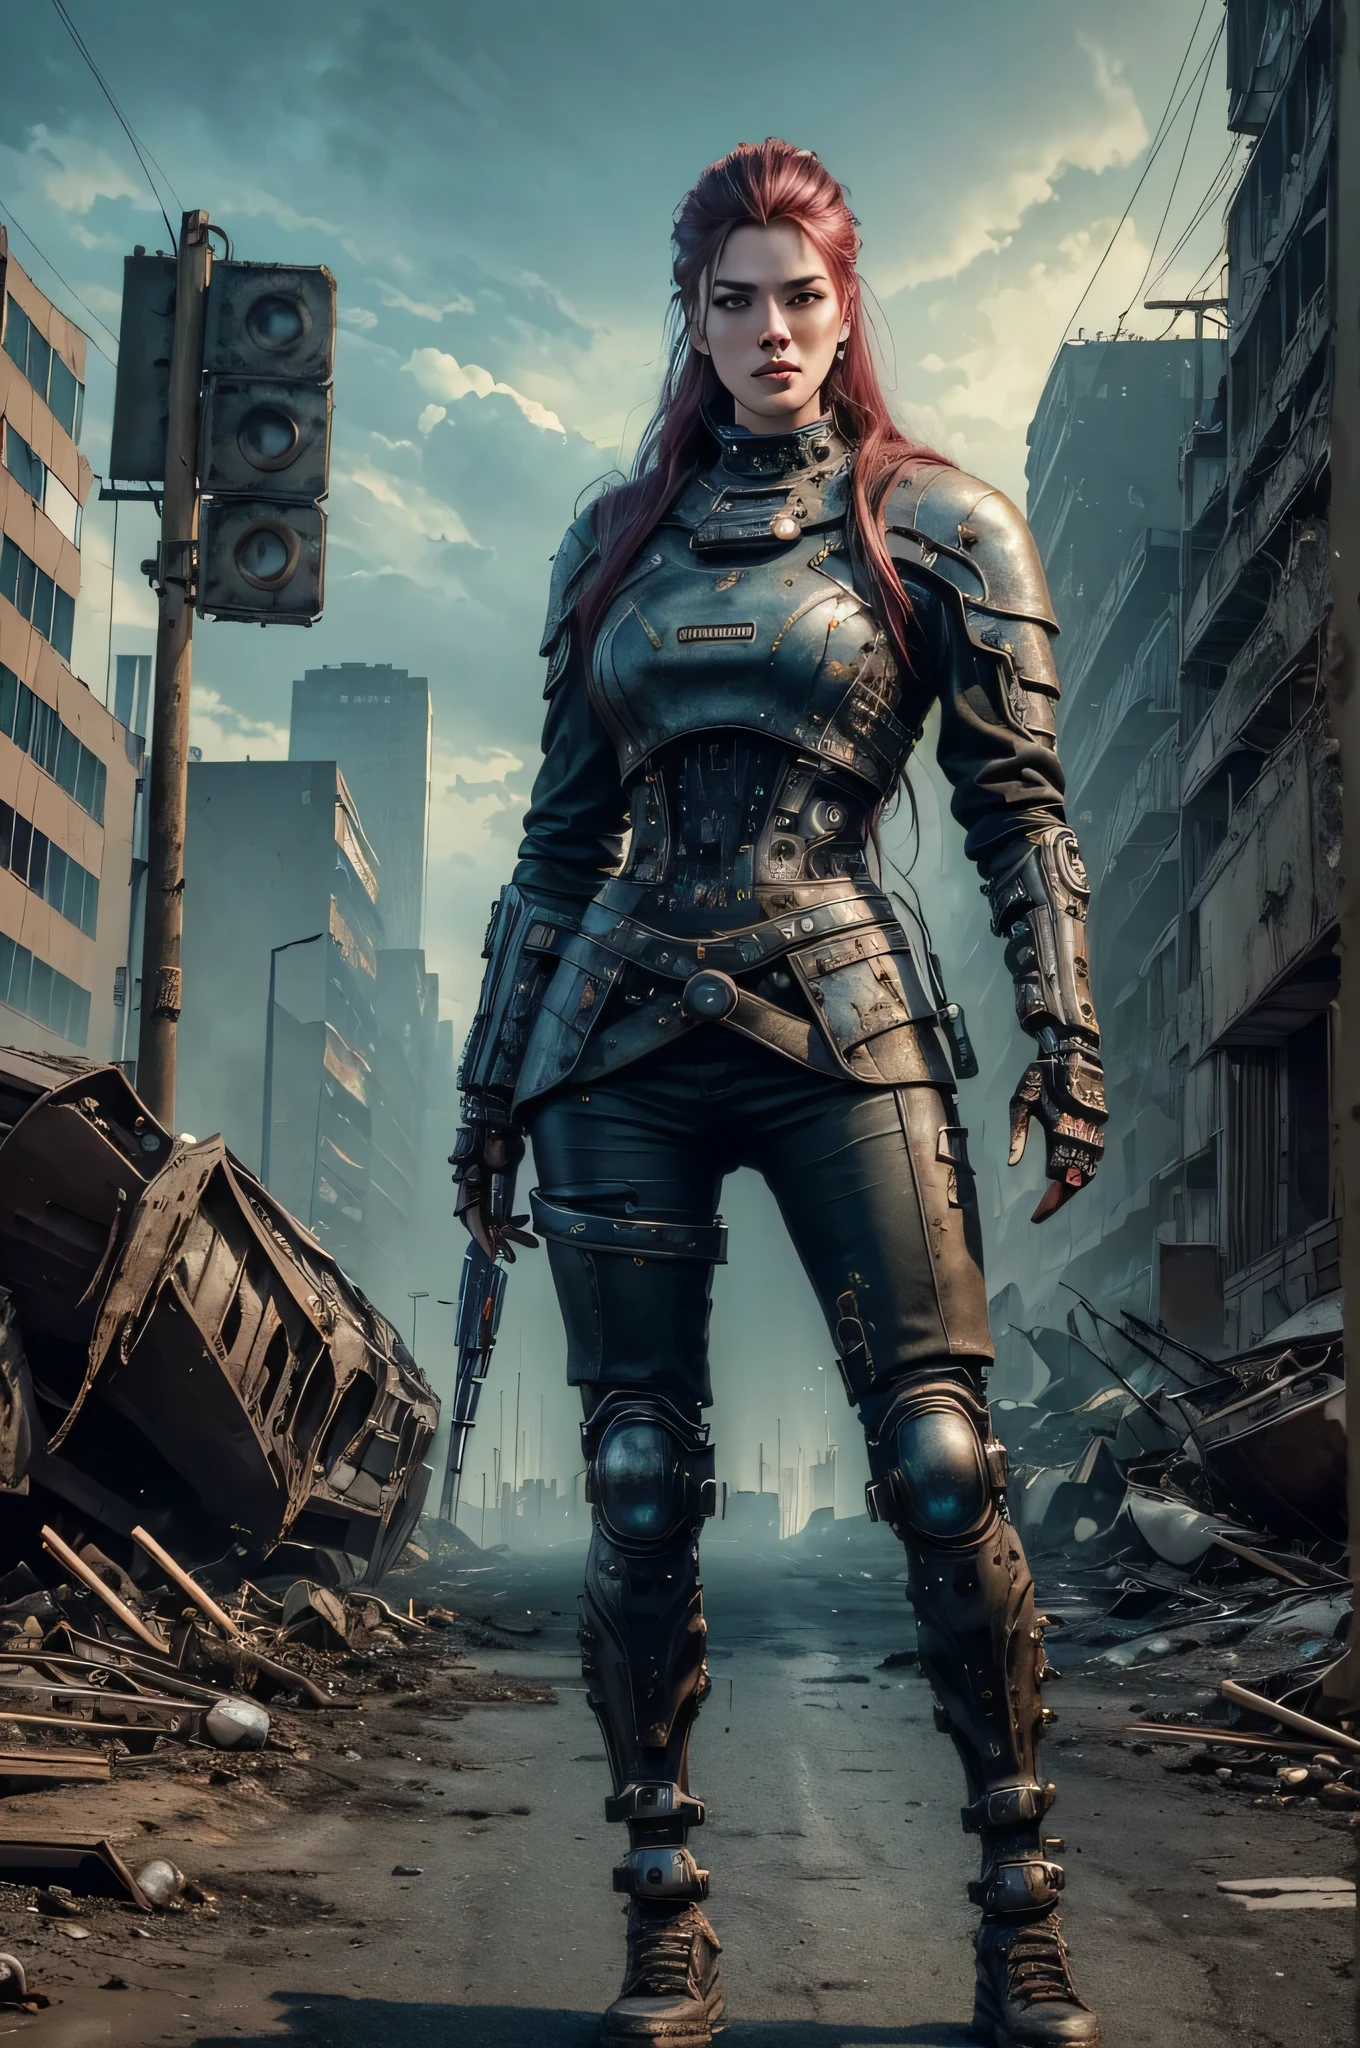 ((best quality)), ((masterpiece)), (detailed), ((perfect face, elden ring style, postapocalypse, analog style, knollingcase, swpunk, synthwave, cyborgdiffusion)), beautiful female cyborg in post-apocalyptic world, standing tall from head to toe in the ruined city street